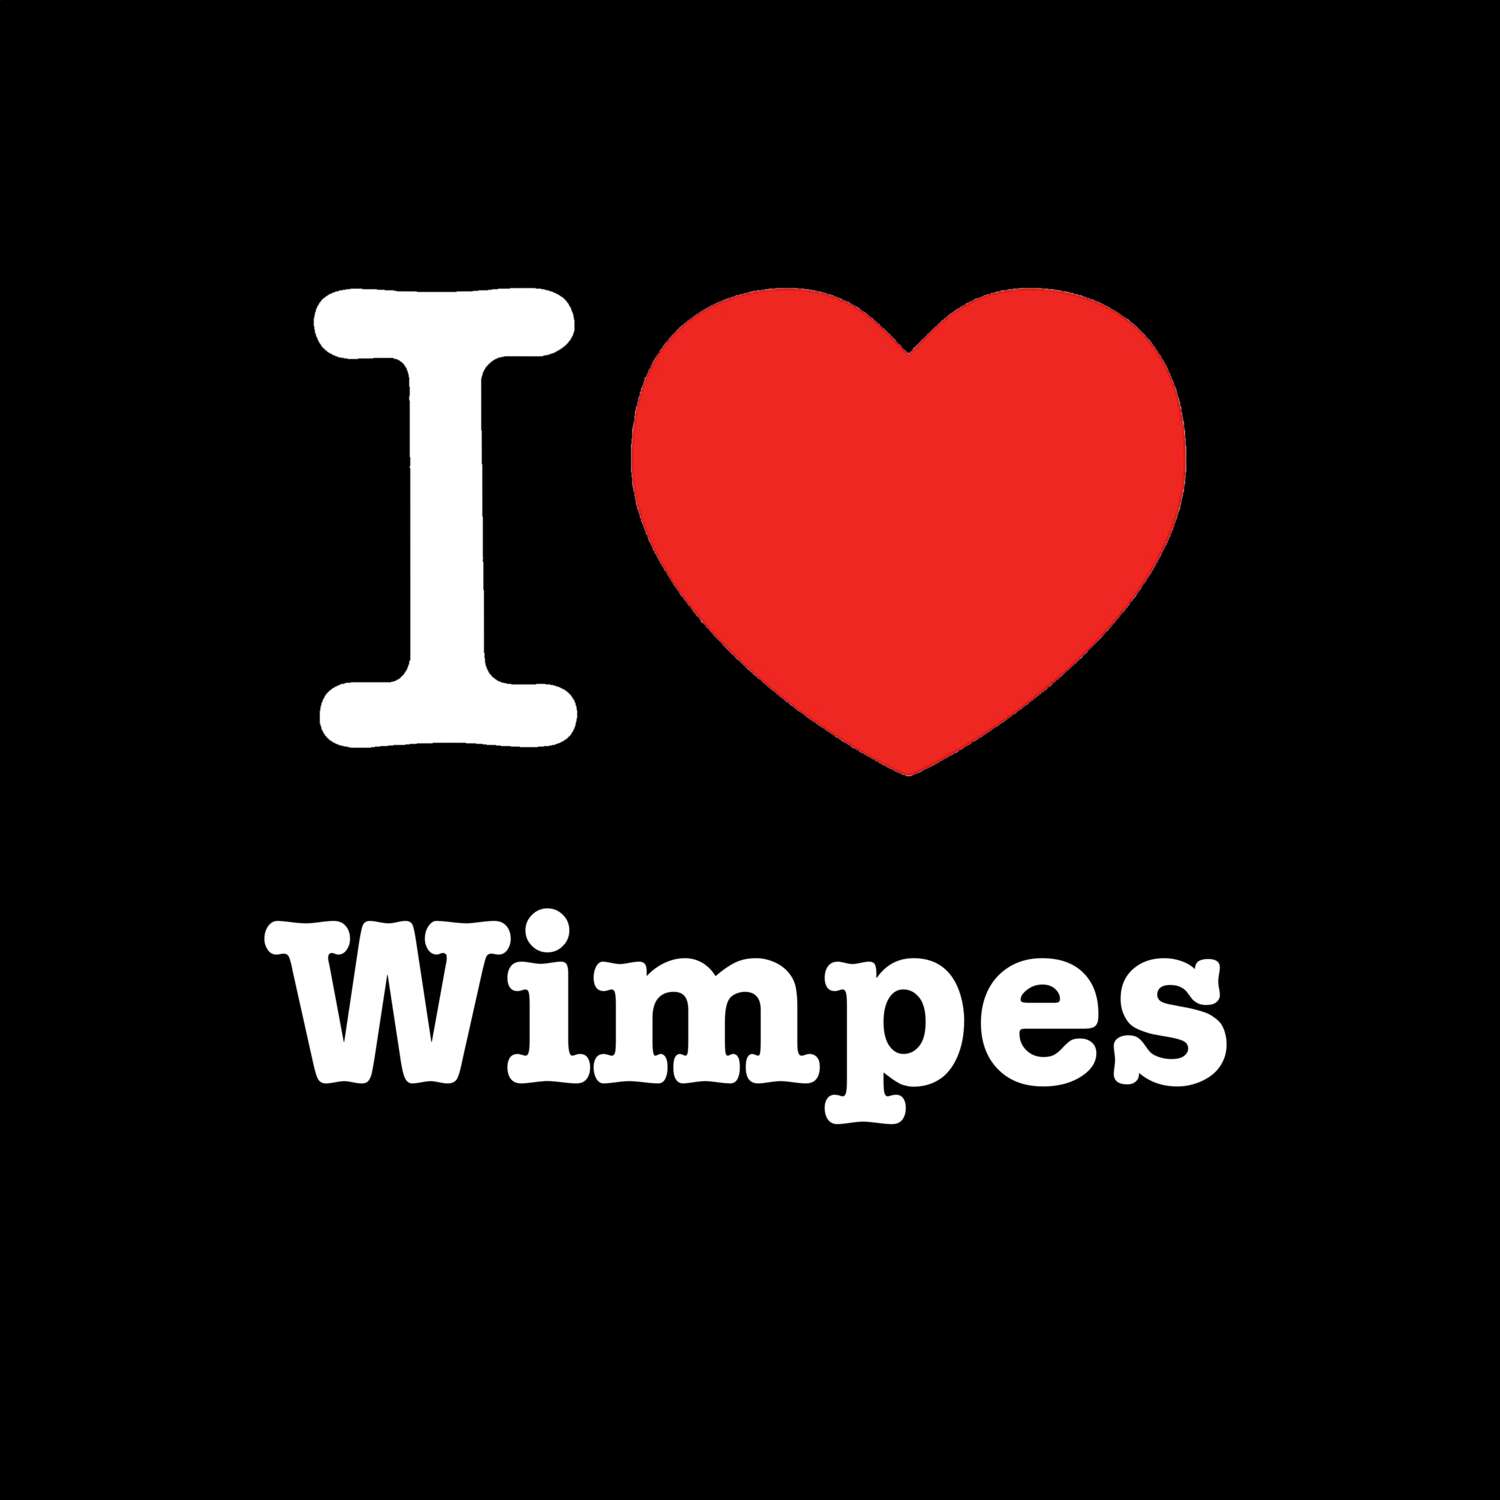 Wimpes T-Shirt »I love«